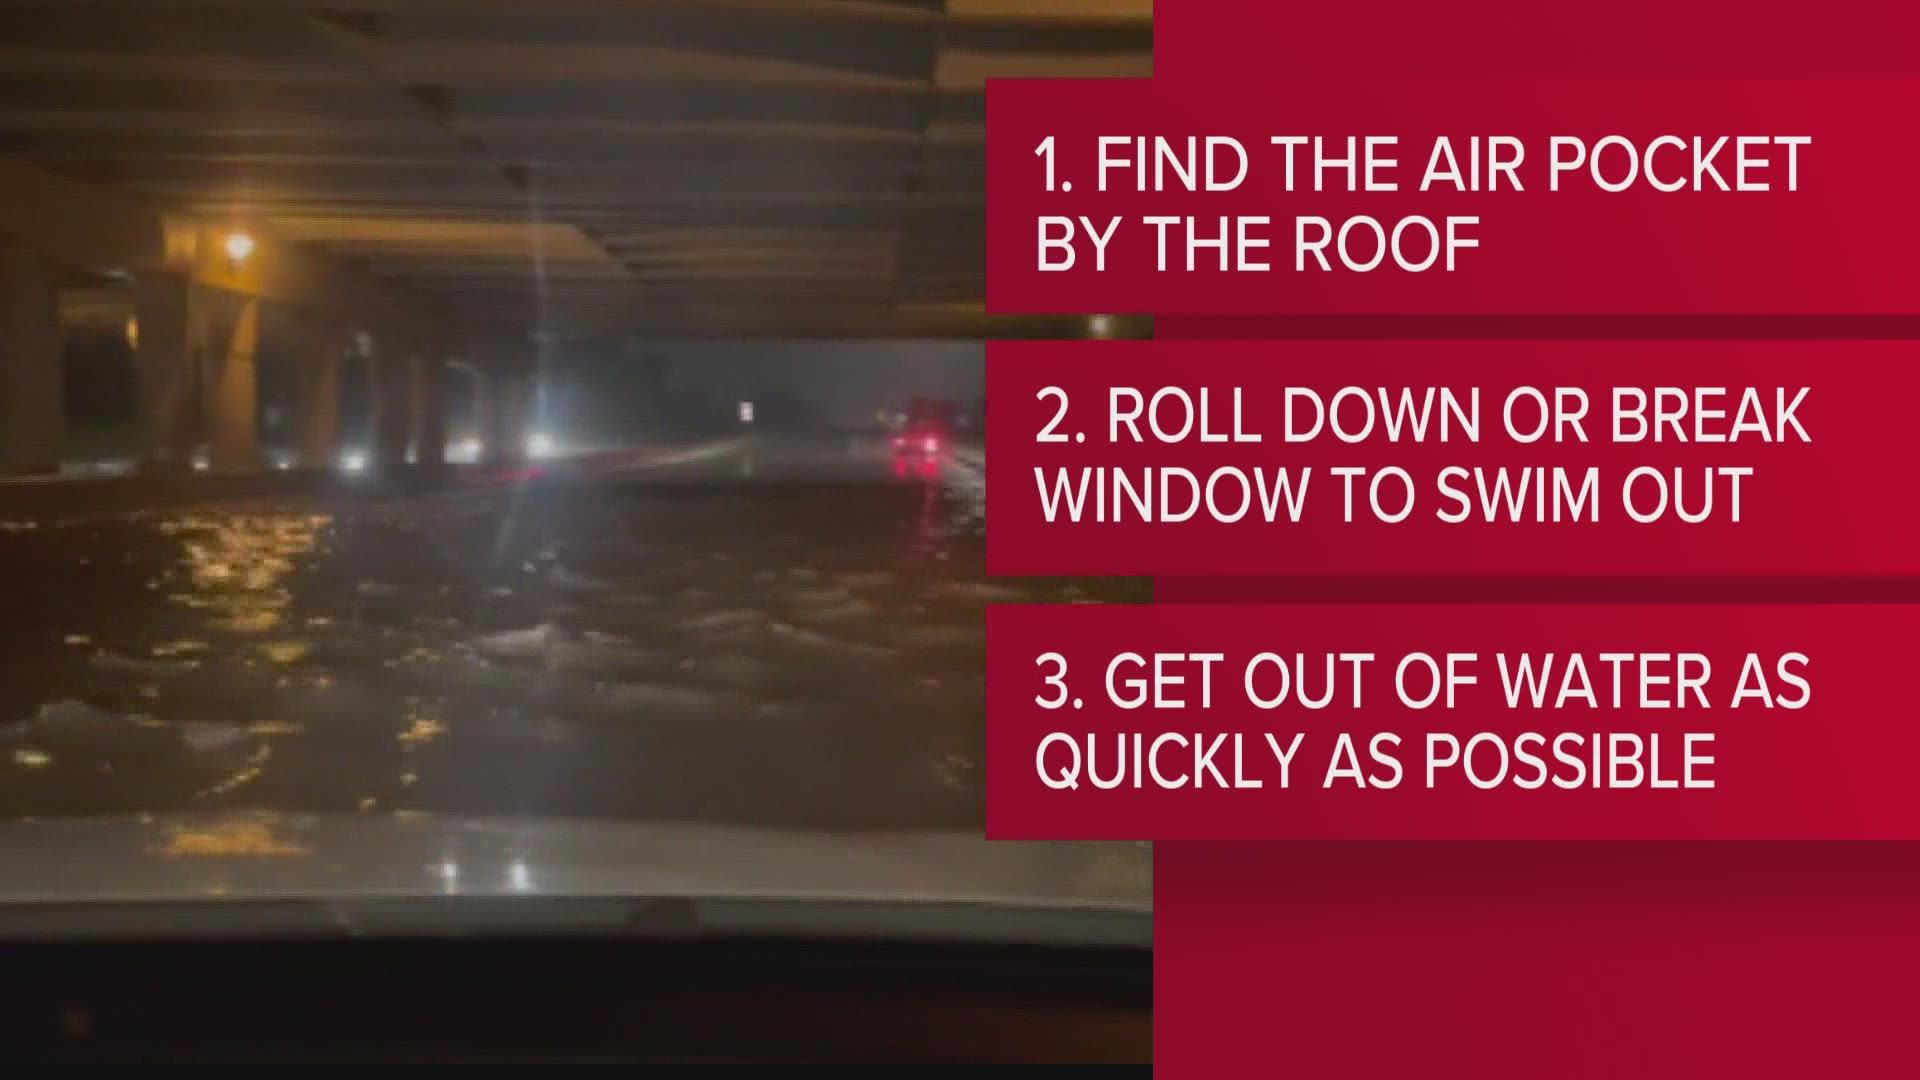 Historic rainfall moved through the St. Louis area Tuesday morning and brought flash flooding with it. Here’s what to do if you get suck in flooding.